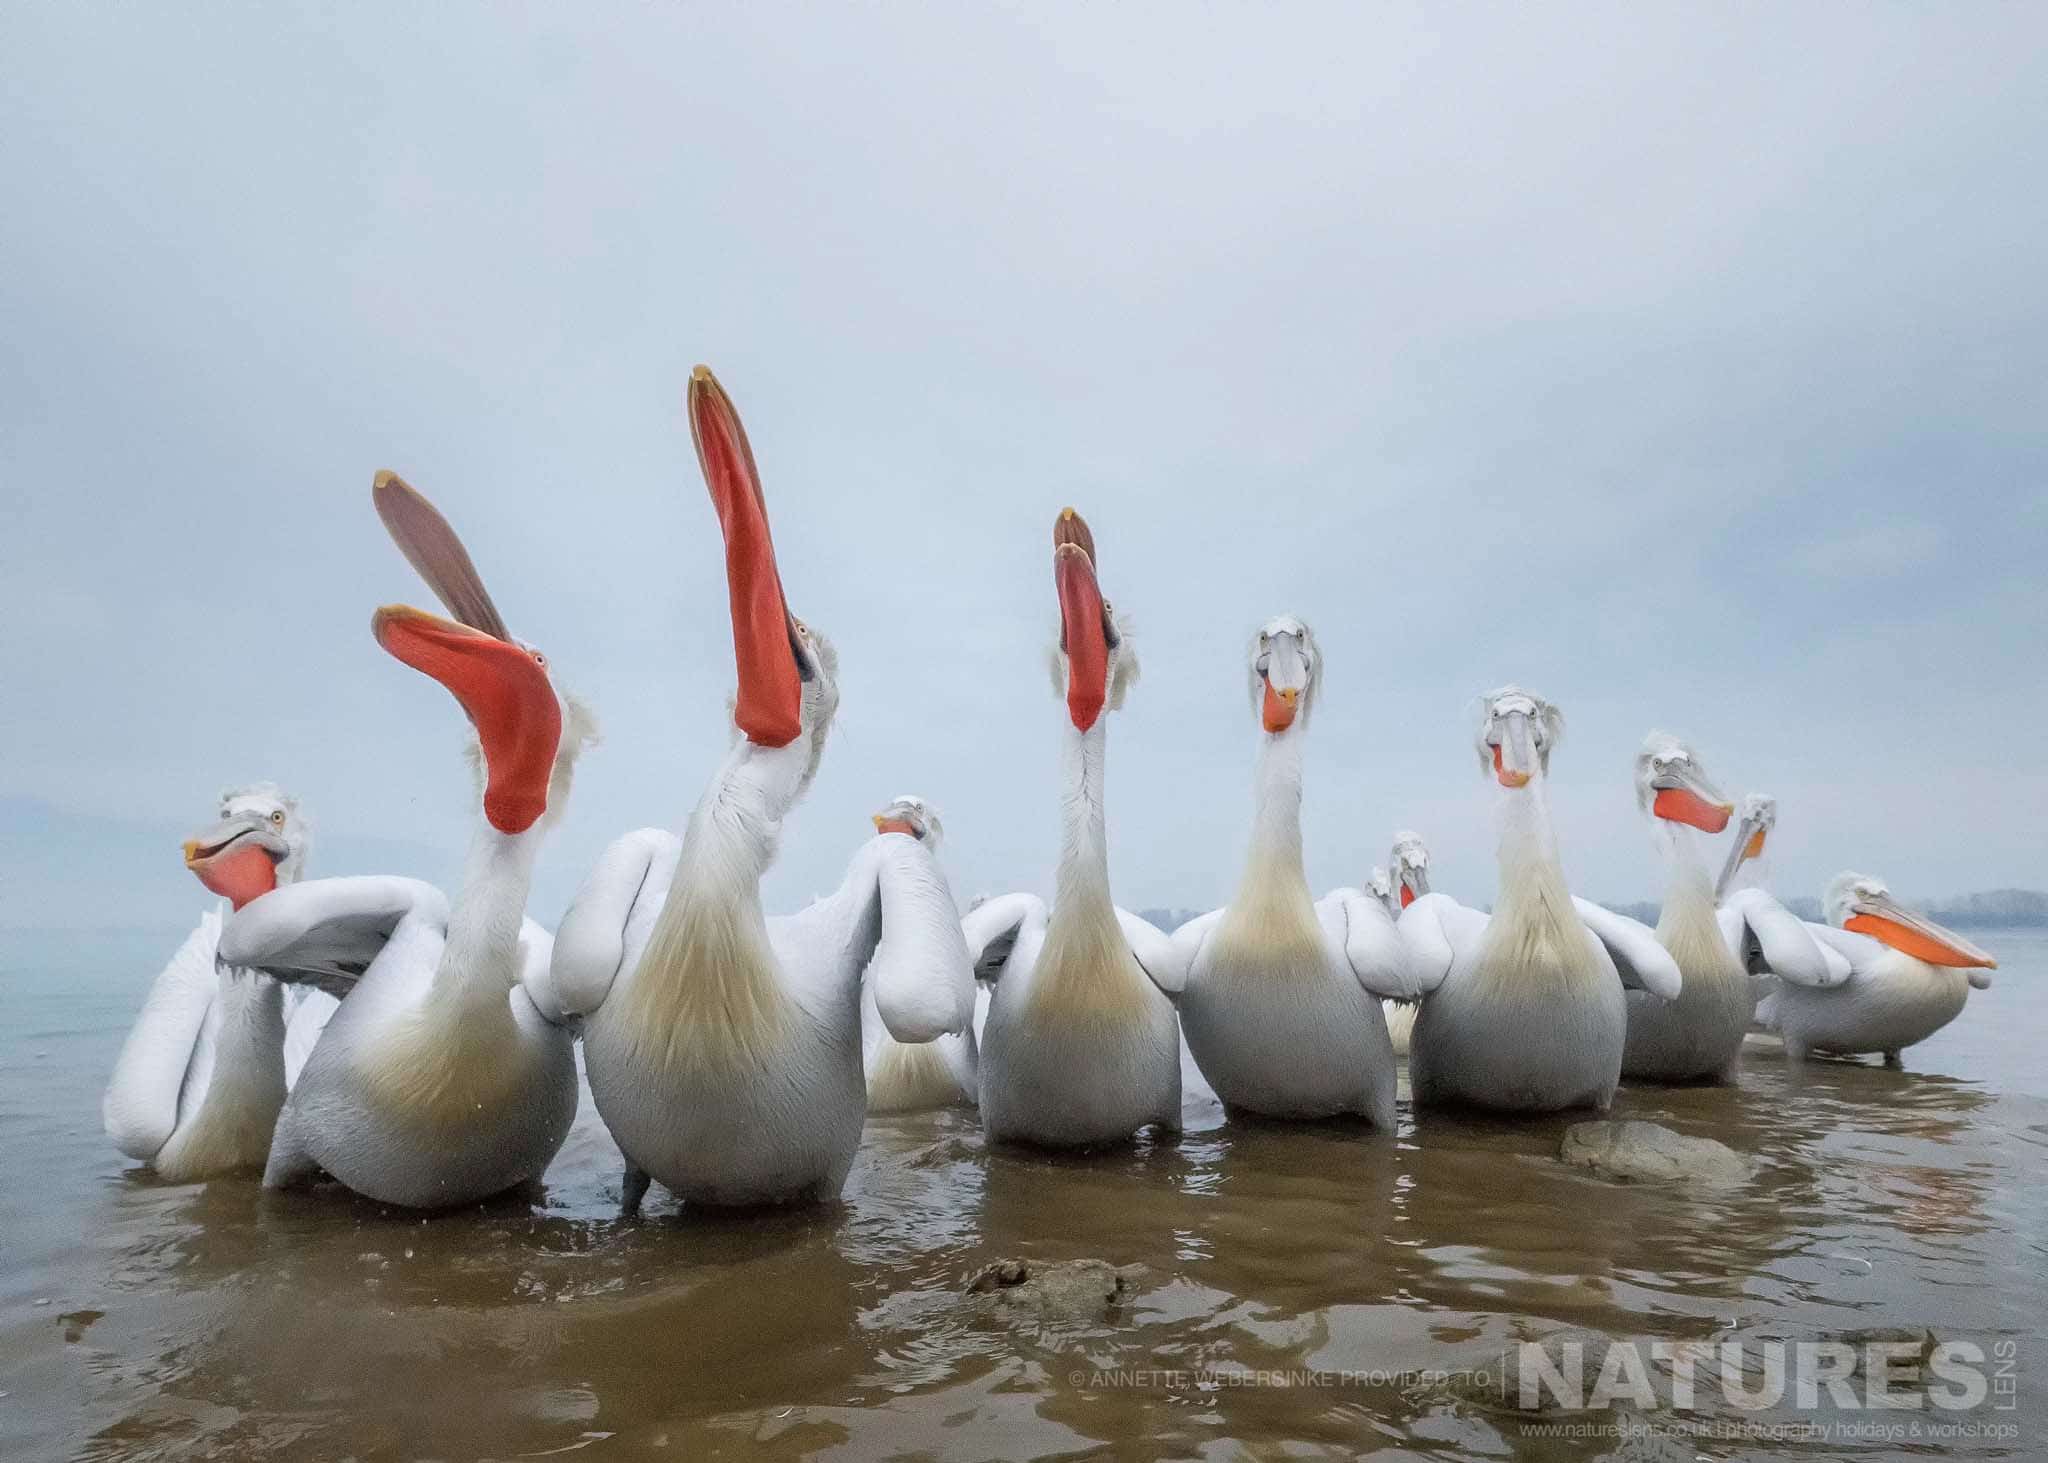 A wide angle image of a pod of pelicans at one of the shoreline feeds image captured during a NaturesLens Dalmatian Pelican Photography Holiday